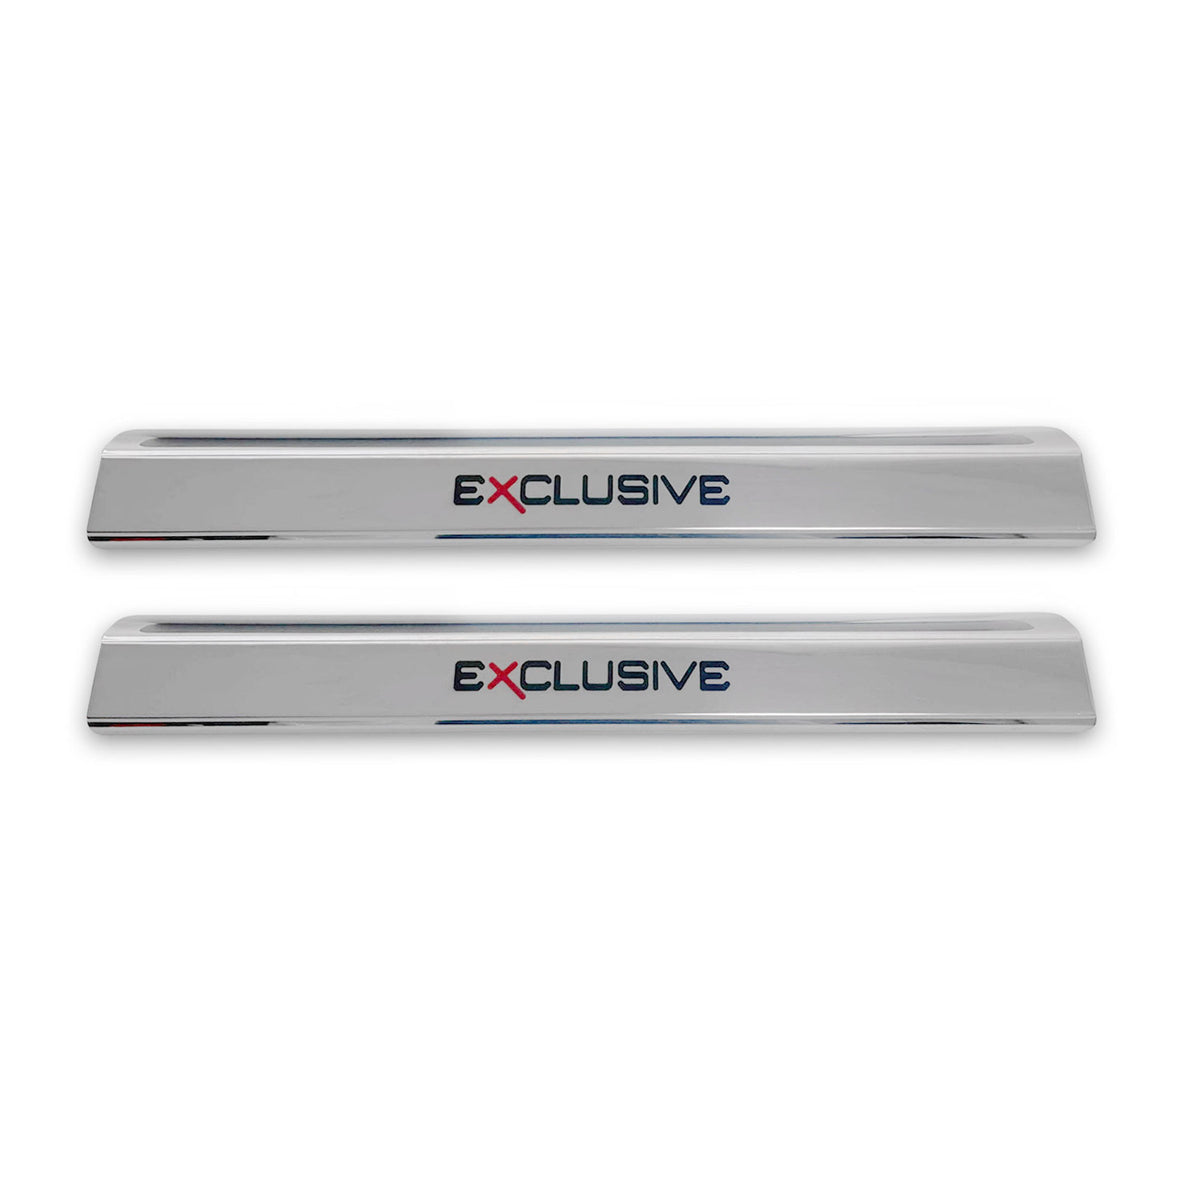 Door sill trims edition for BMW X1 X2 X3 X4 stainless steel silver 2 pieces